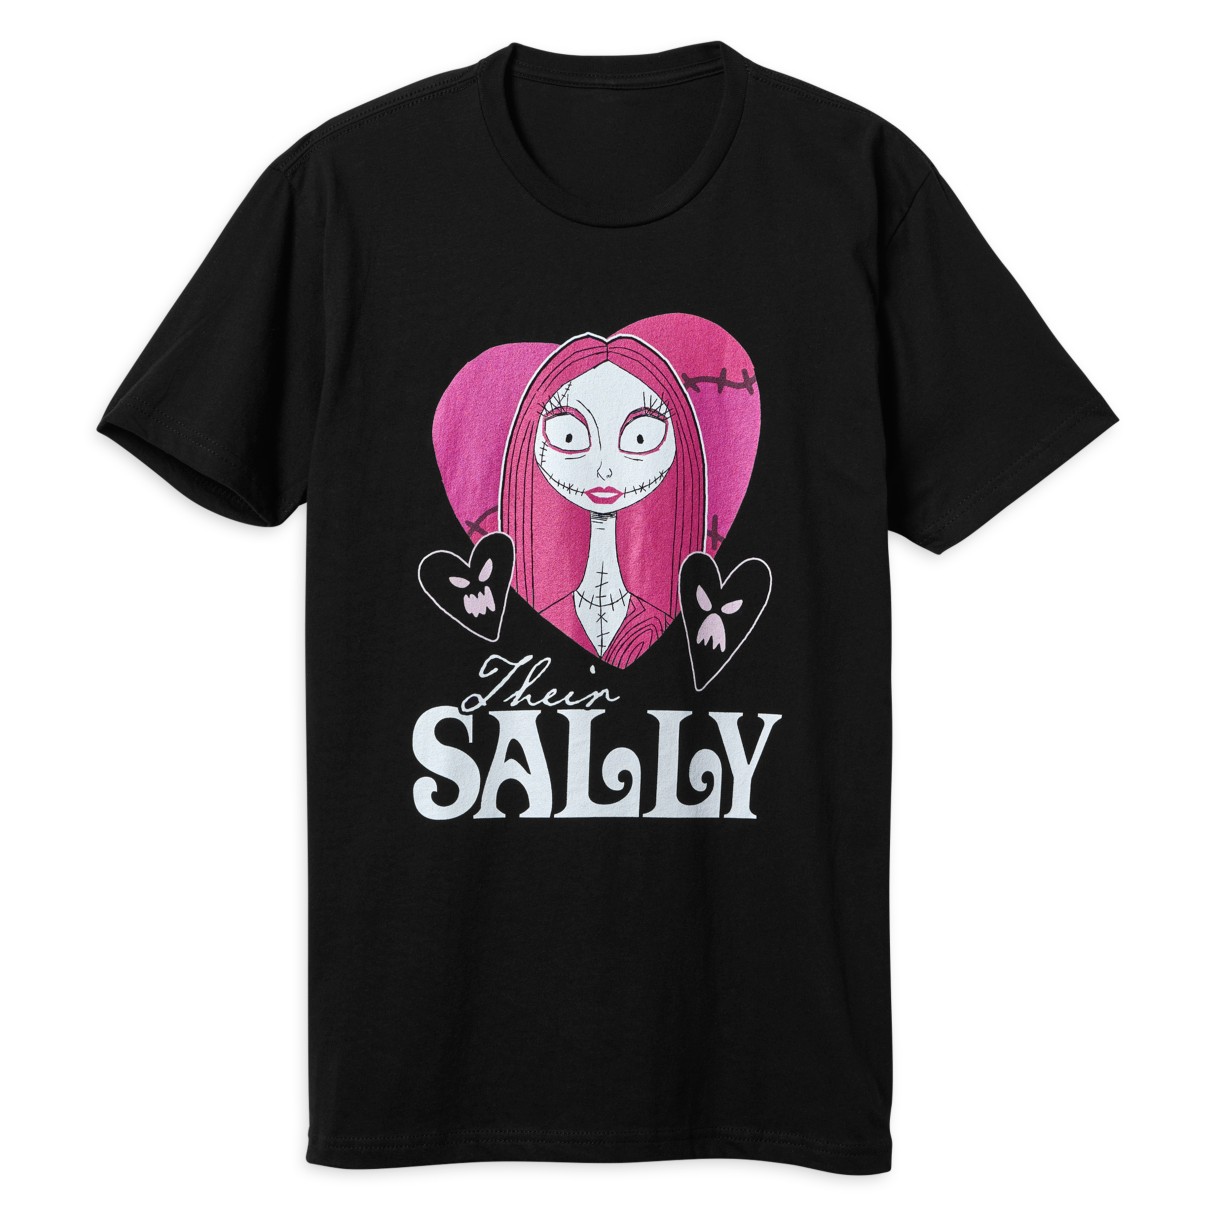 The Nightmare Before Christmas ''Their Sally'' Companion T-Shirt for Adults